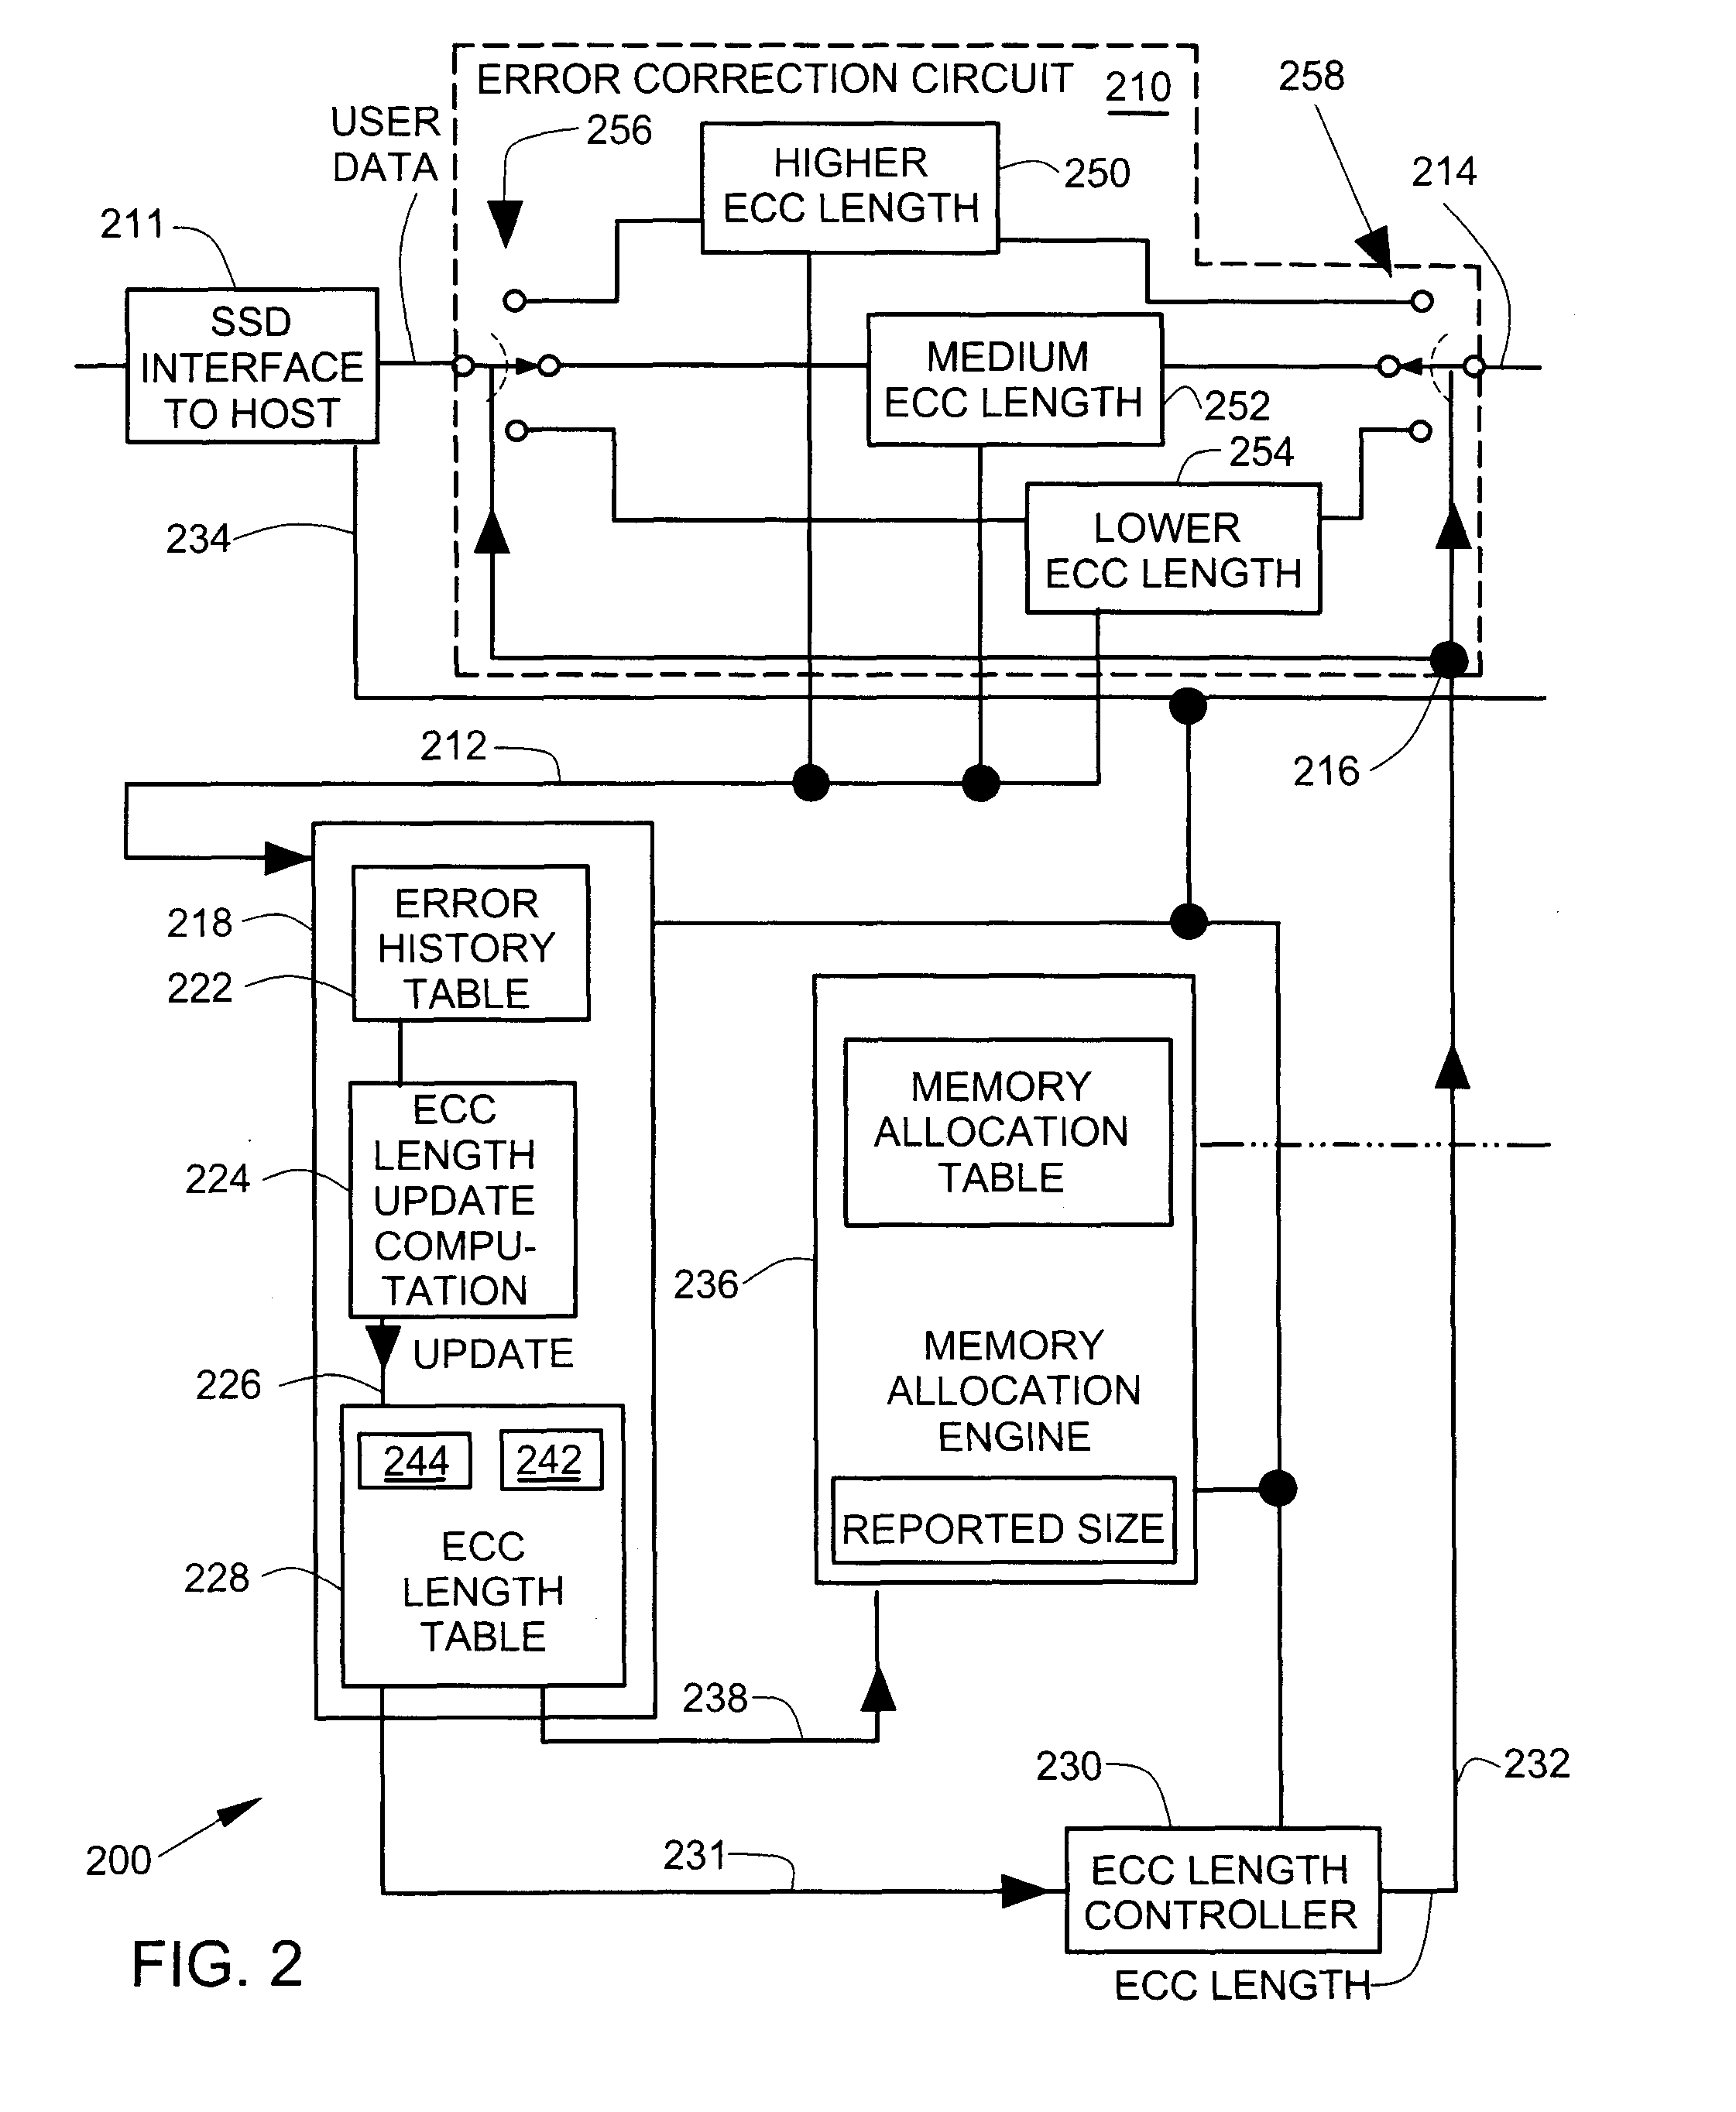 Adjustable error correction code length in an electrical storage device